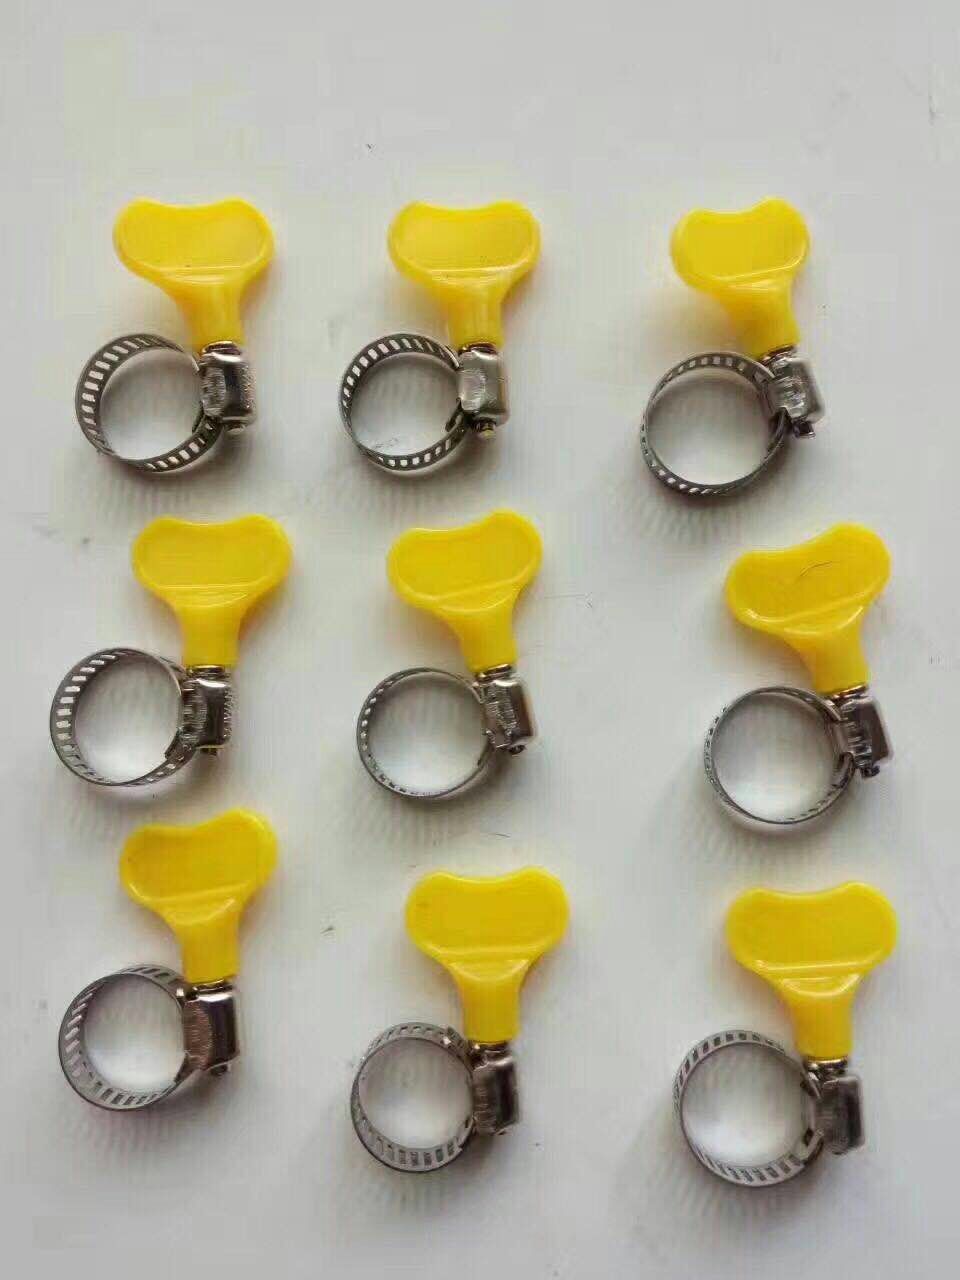 4 Inch Key Hose Vent Clamp for Ducting Connection